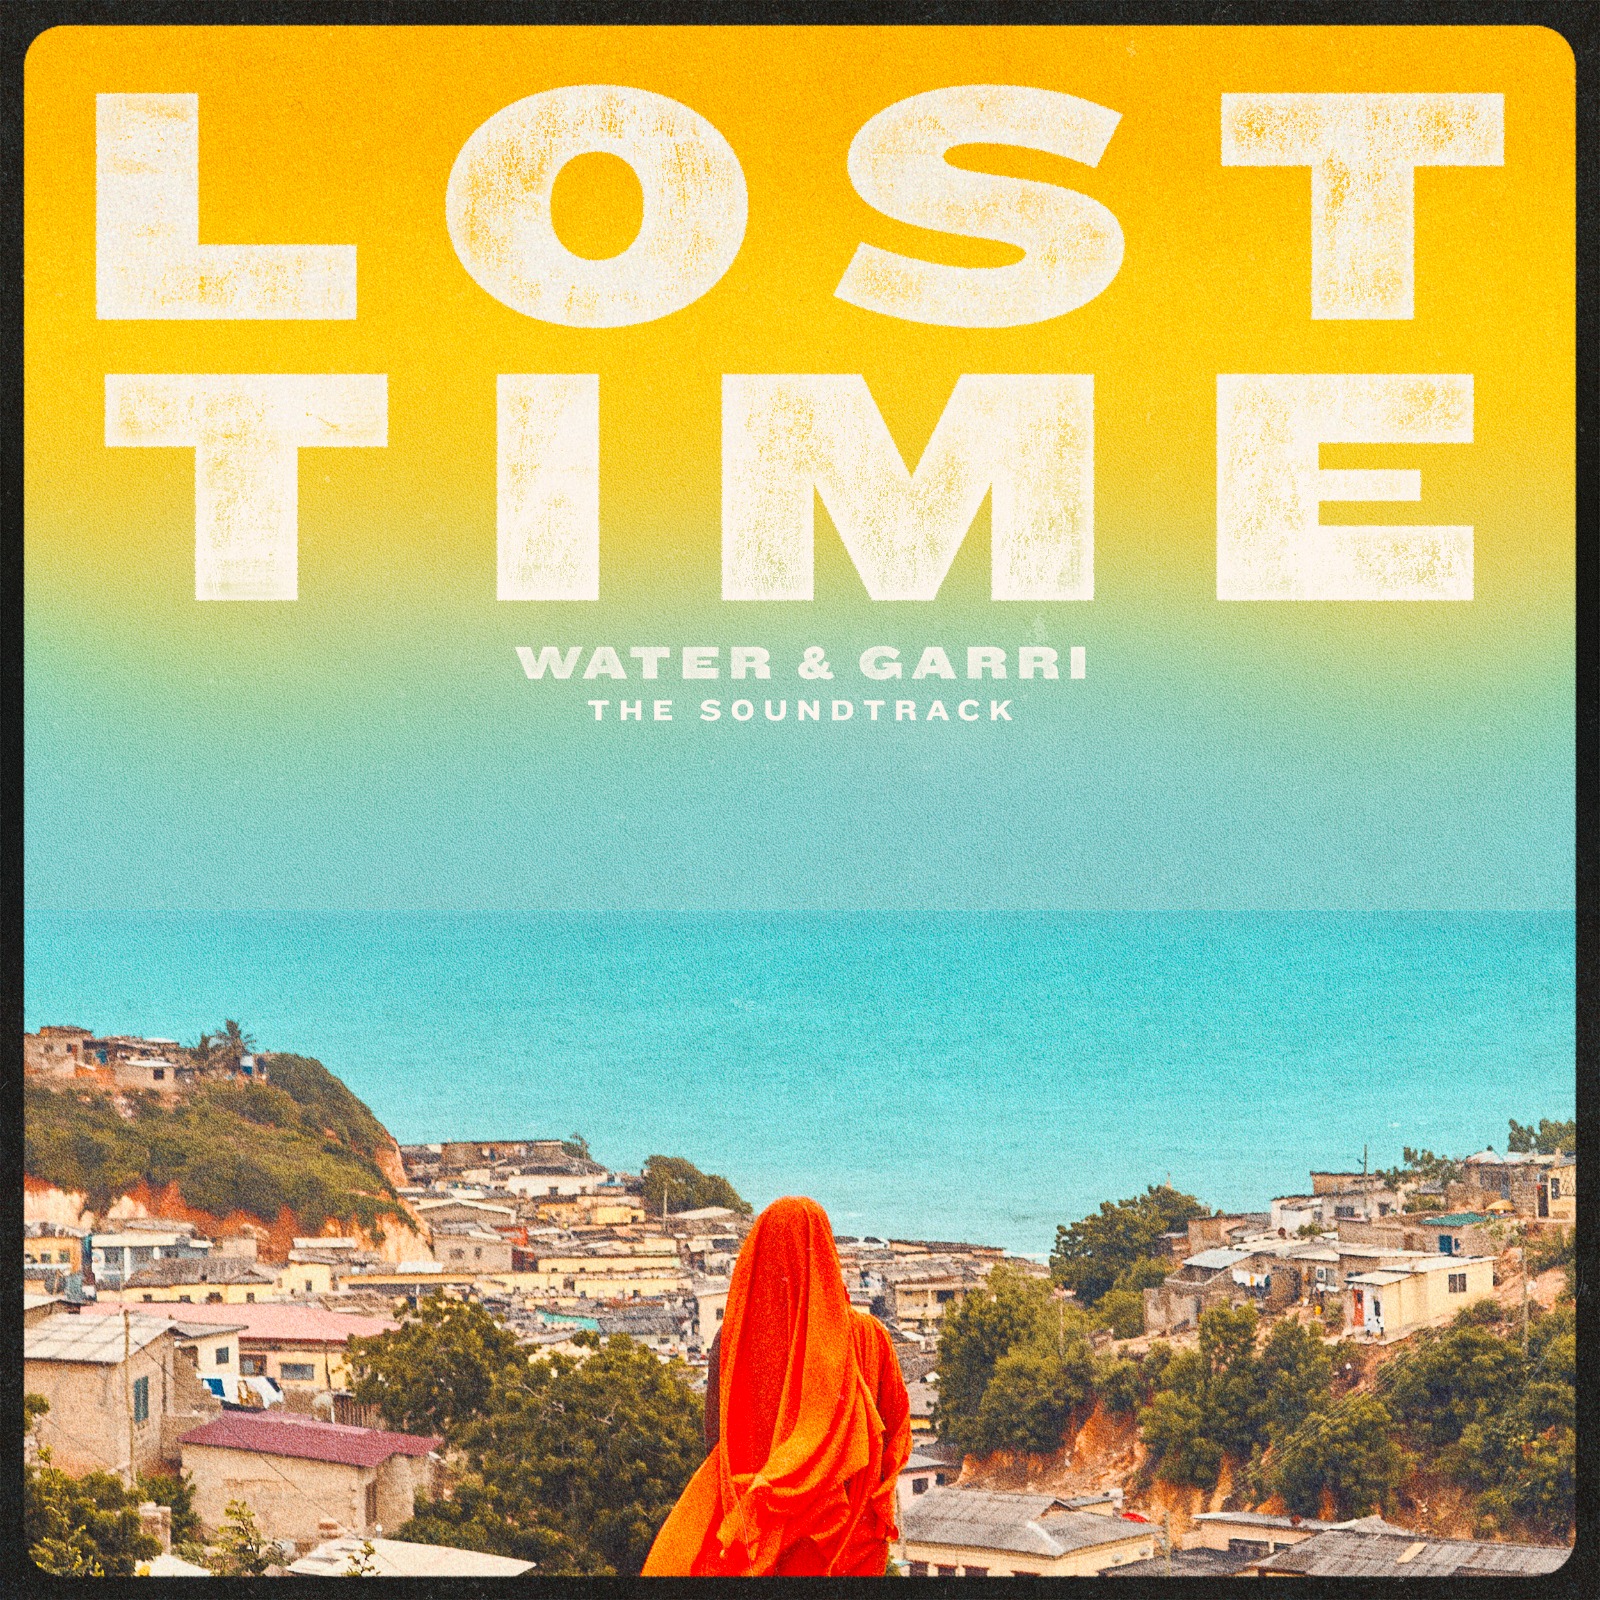 Tiwa Savage releases 'Lost Time' off the soundtrack album of her debut feature film 'Water & Garri'